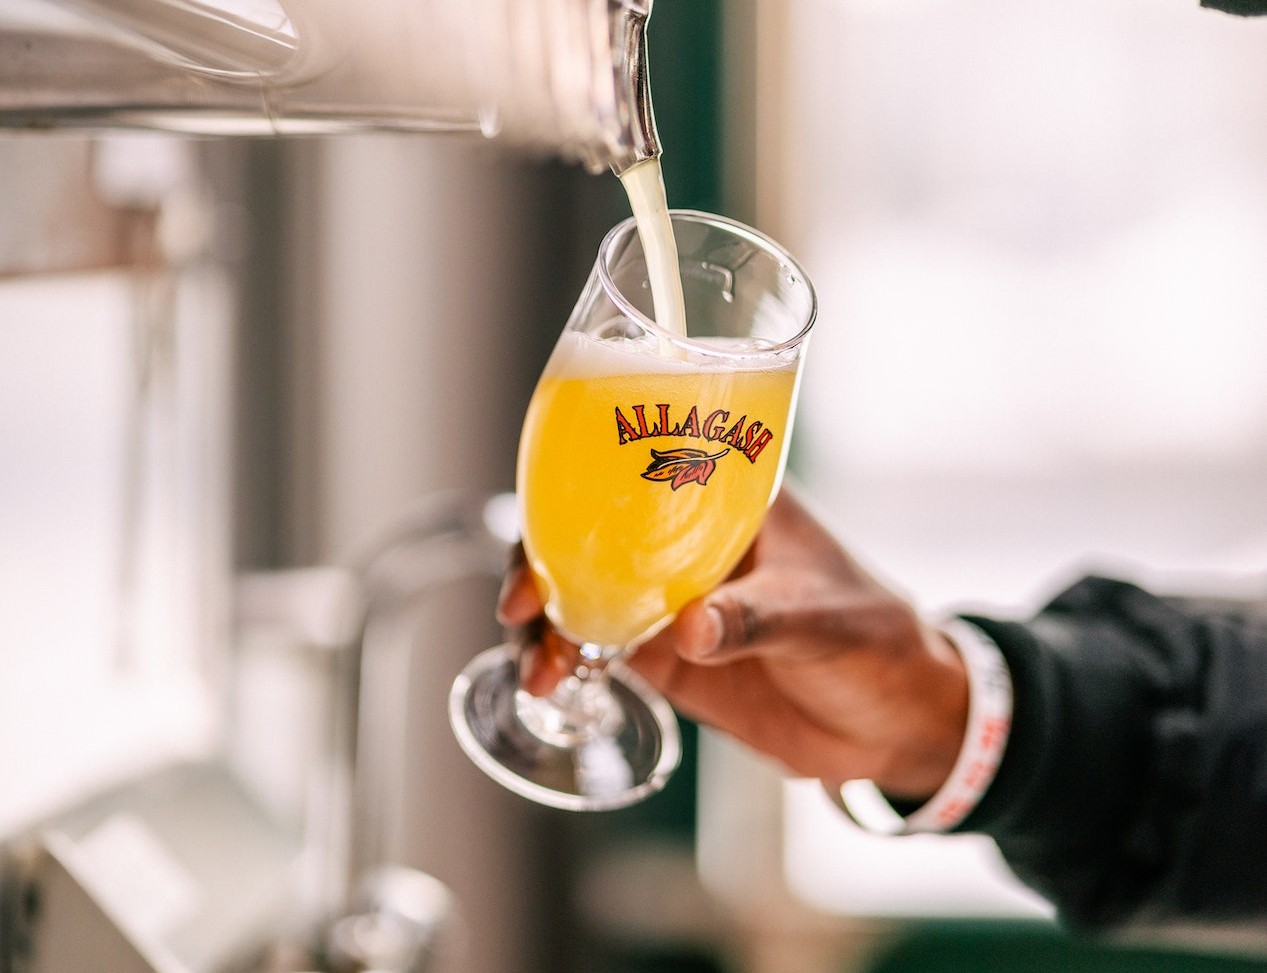 Allagash White is the most awarded Belgian-style witbier in the world